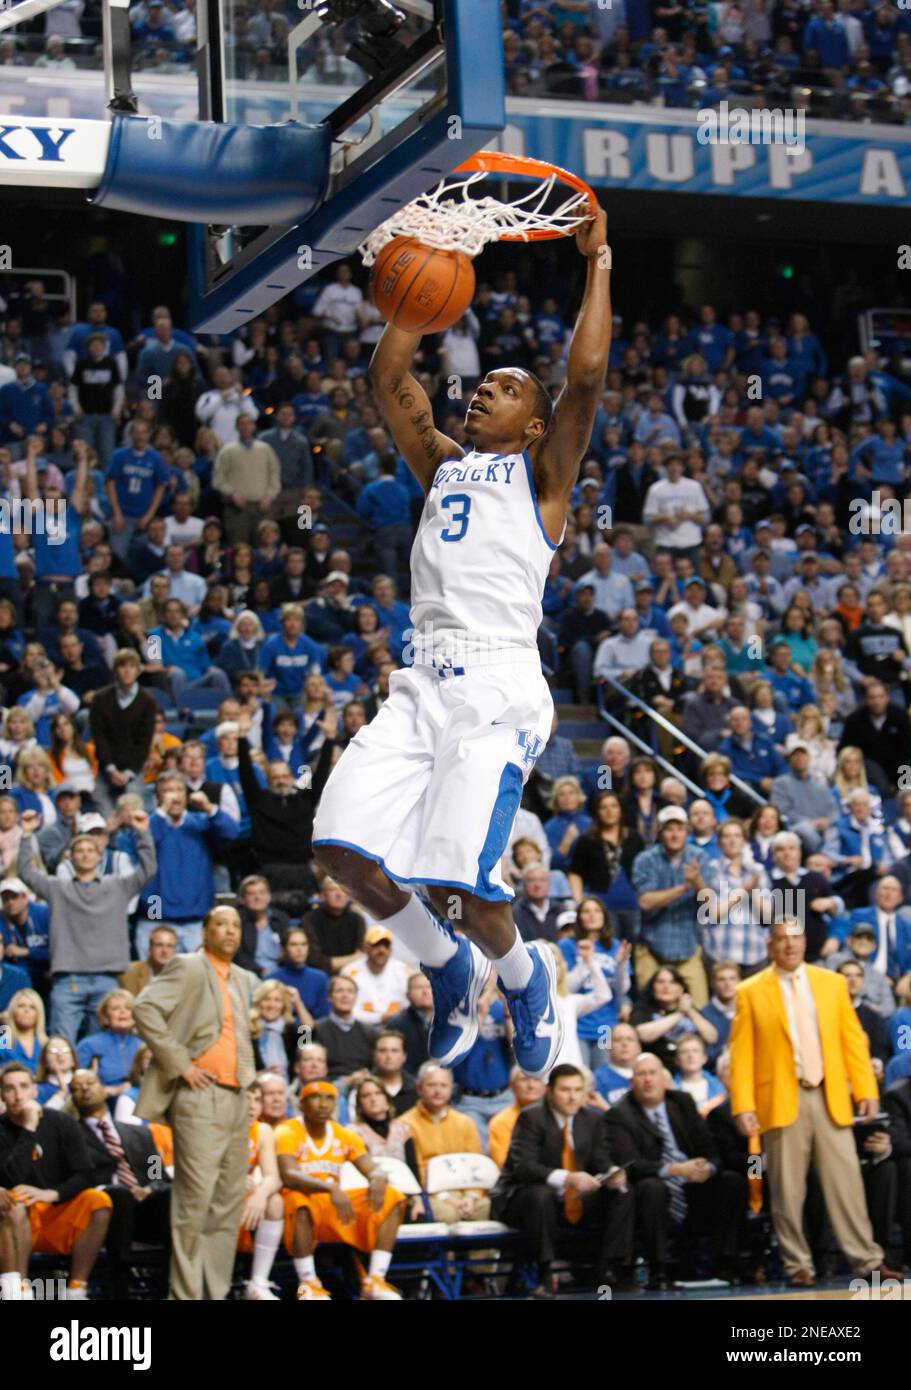 kentuckys-darnell-dodson-in-action-during-the-first-half-of-their-ncaa-college-basketball-game-against-tennessee-in-lexington-ky-saturday-feb-13-2010-ap-photoed-reinke-2NEAXE2.jpg